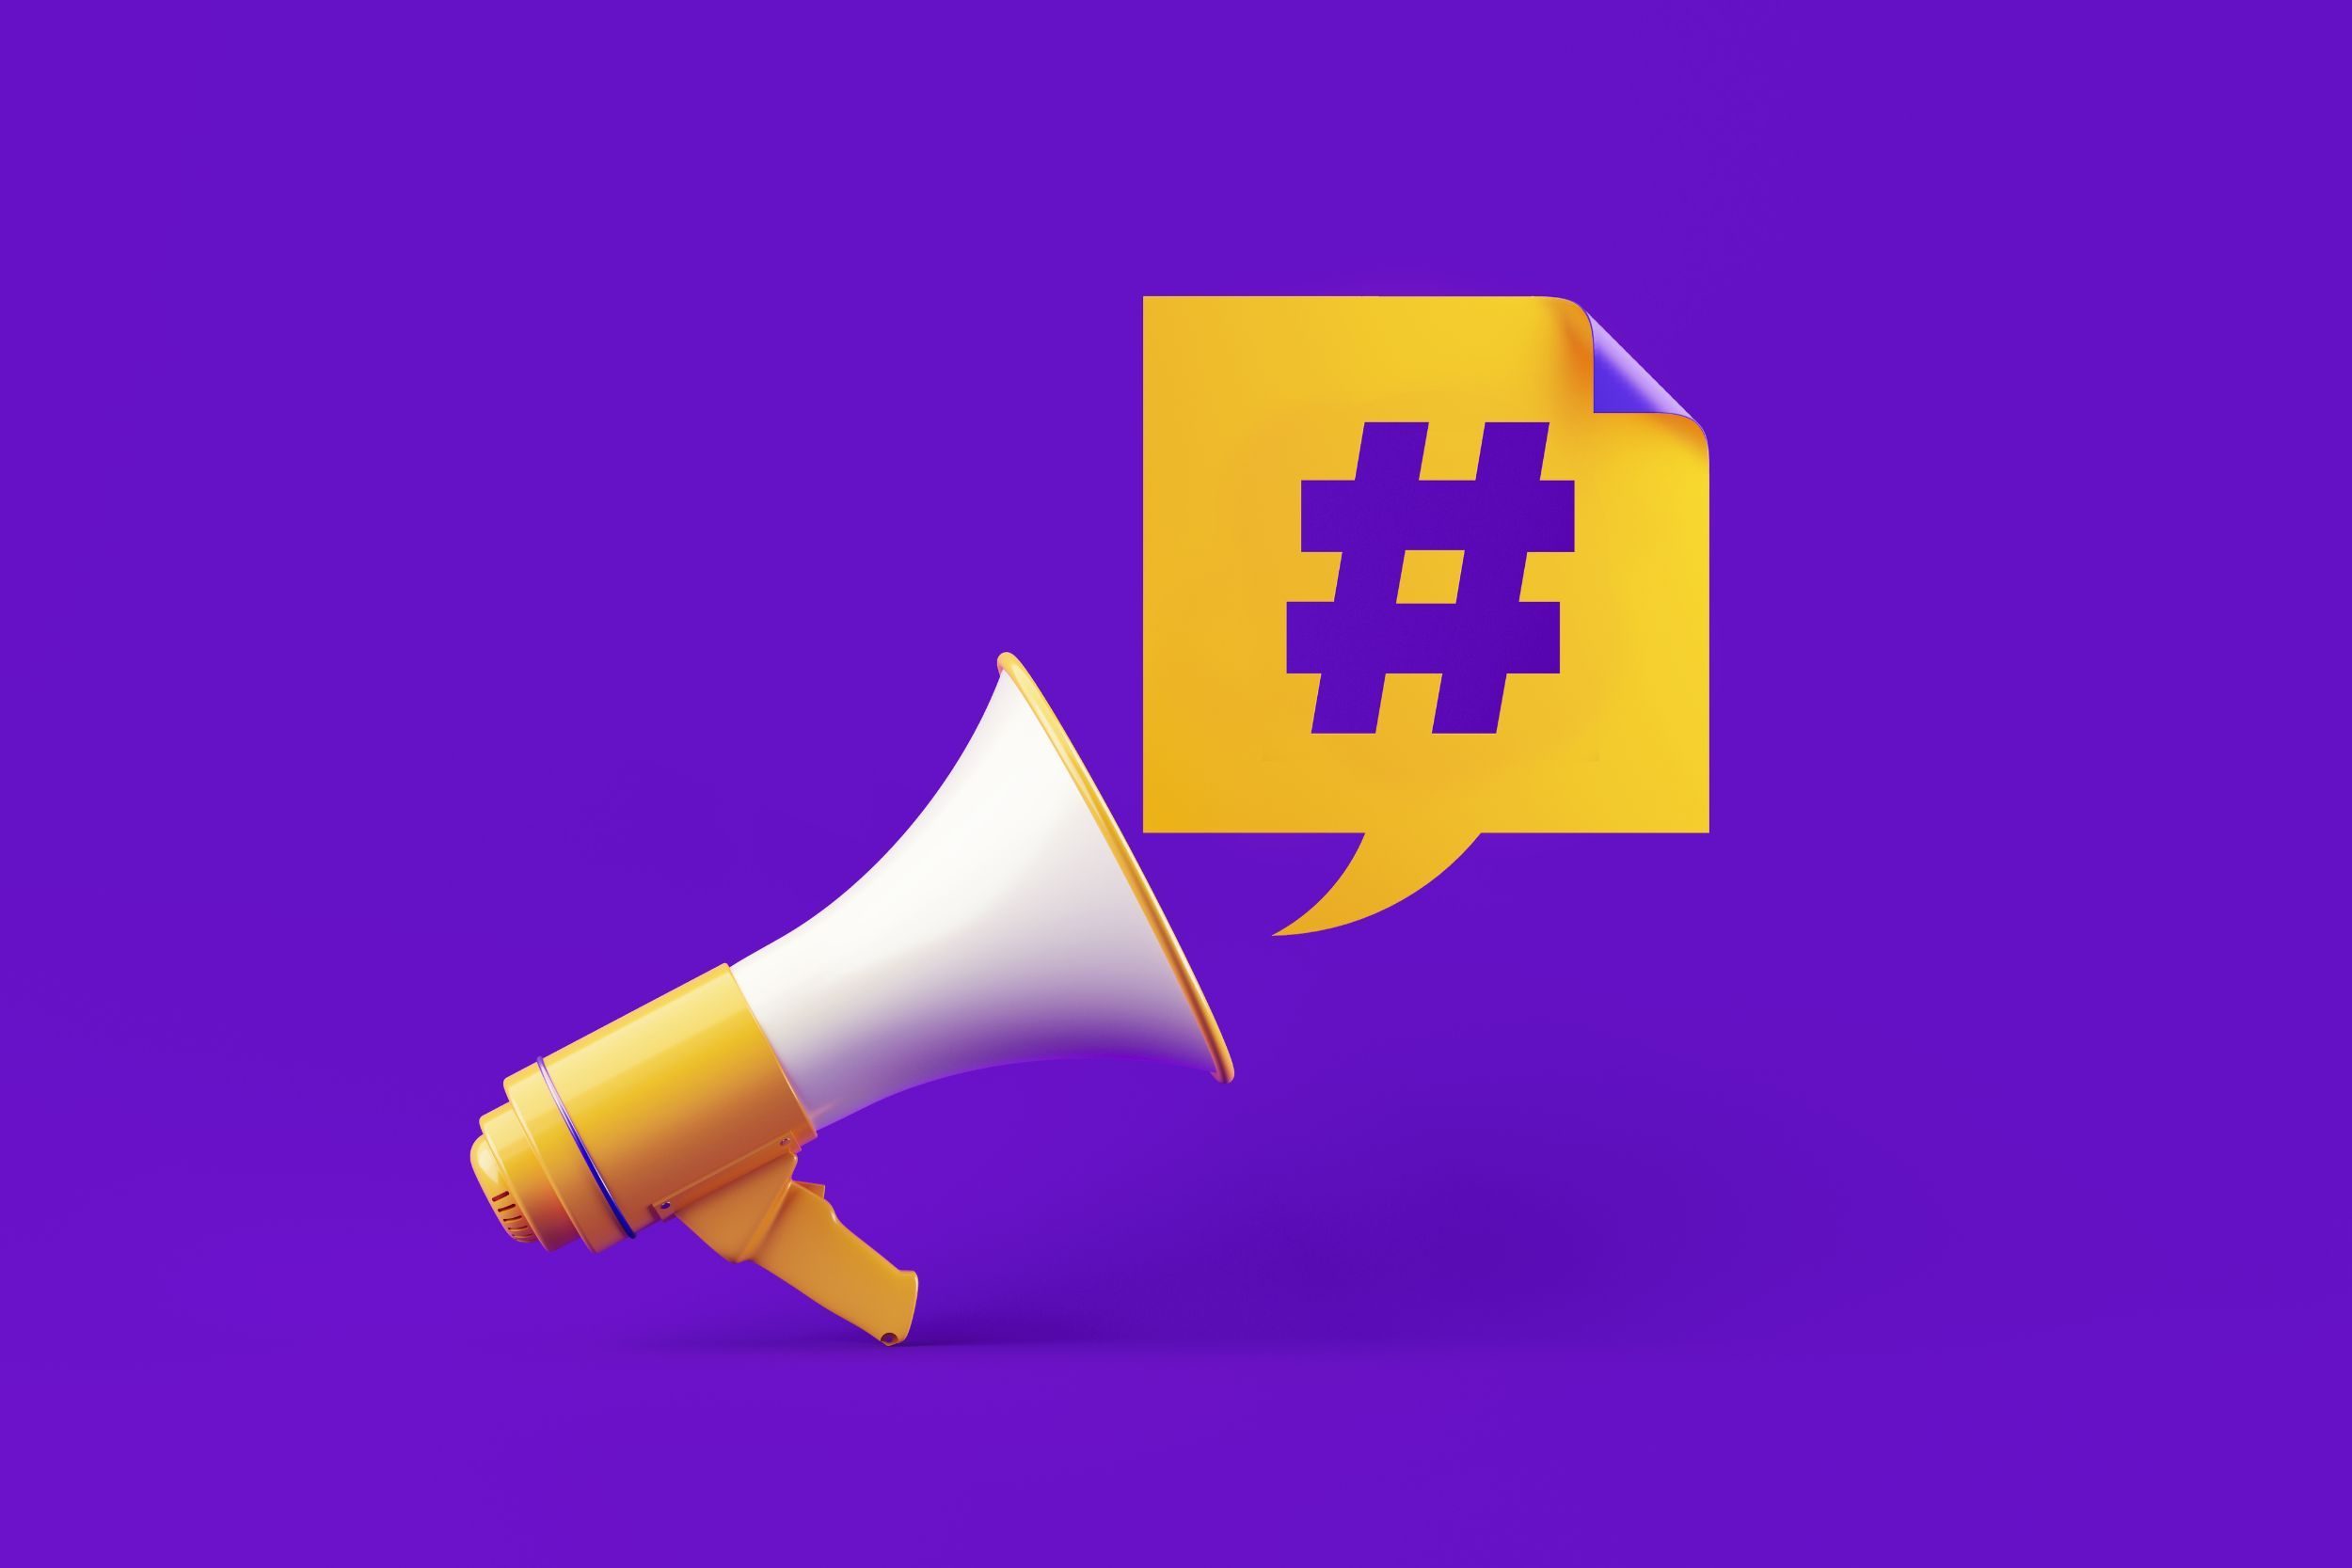 Megaphone pointed toward a hashtag on a yellow post-it-note